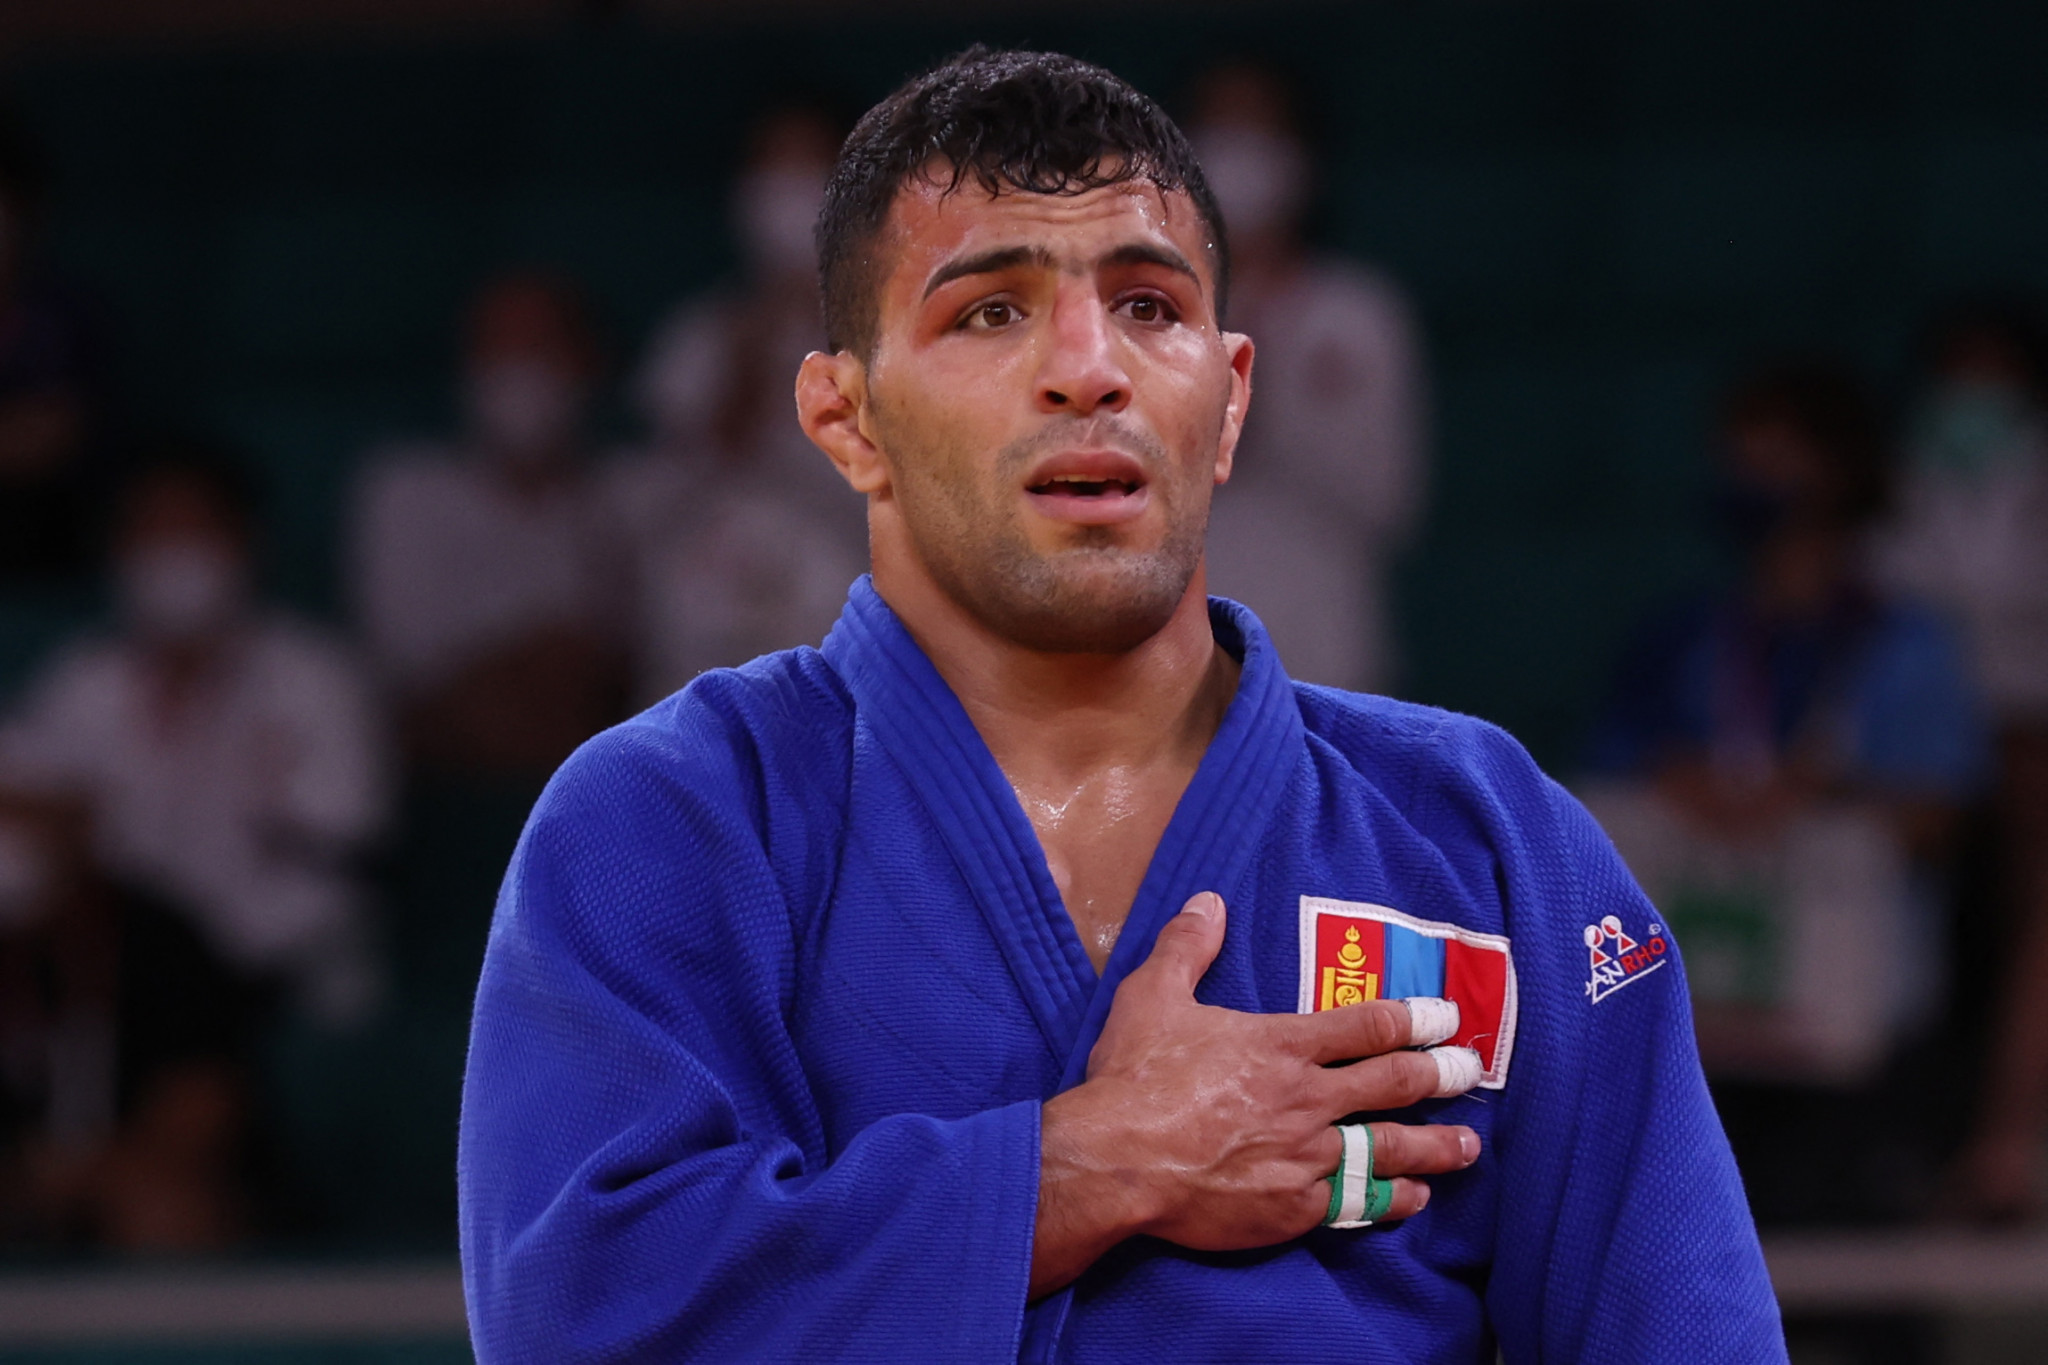 Iranian-born Saeid Mollaei won judo silver for Mongolia at the Tokyo 2020 Olympics, but has had a second change of nationality to Azerbaijan approved by the IOC Executive Board ©Getty Images